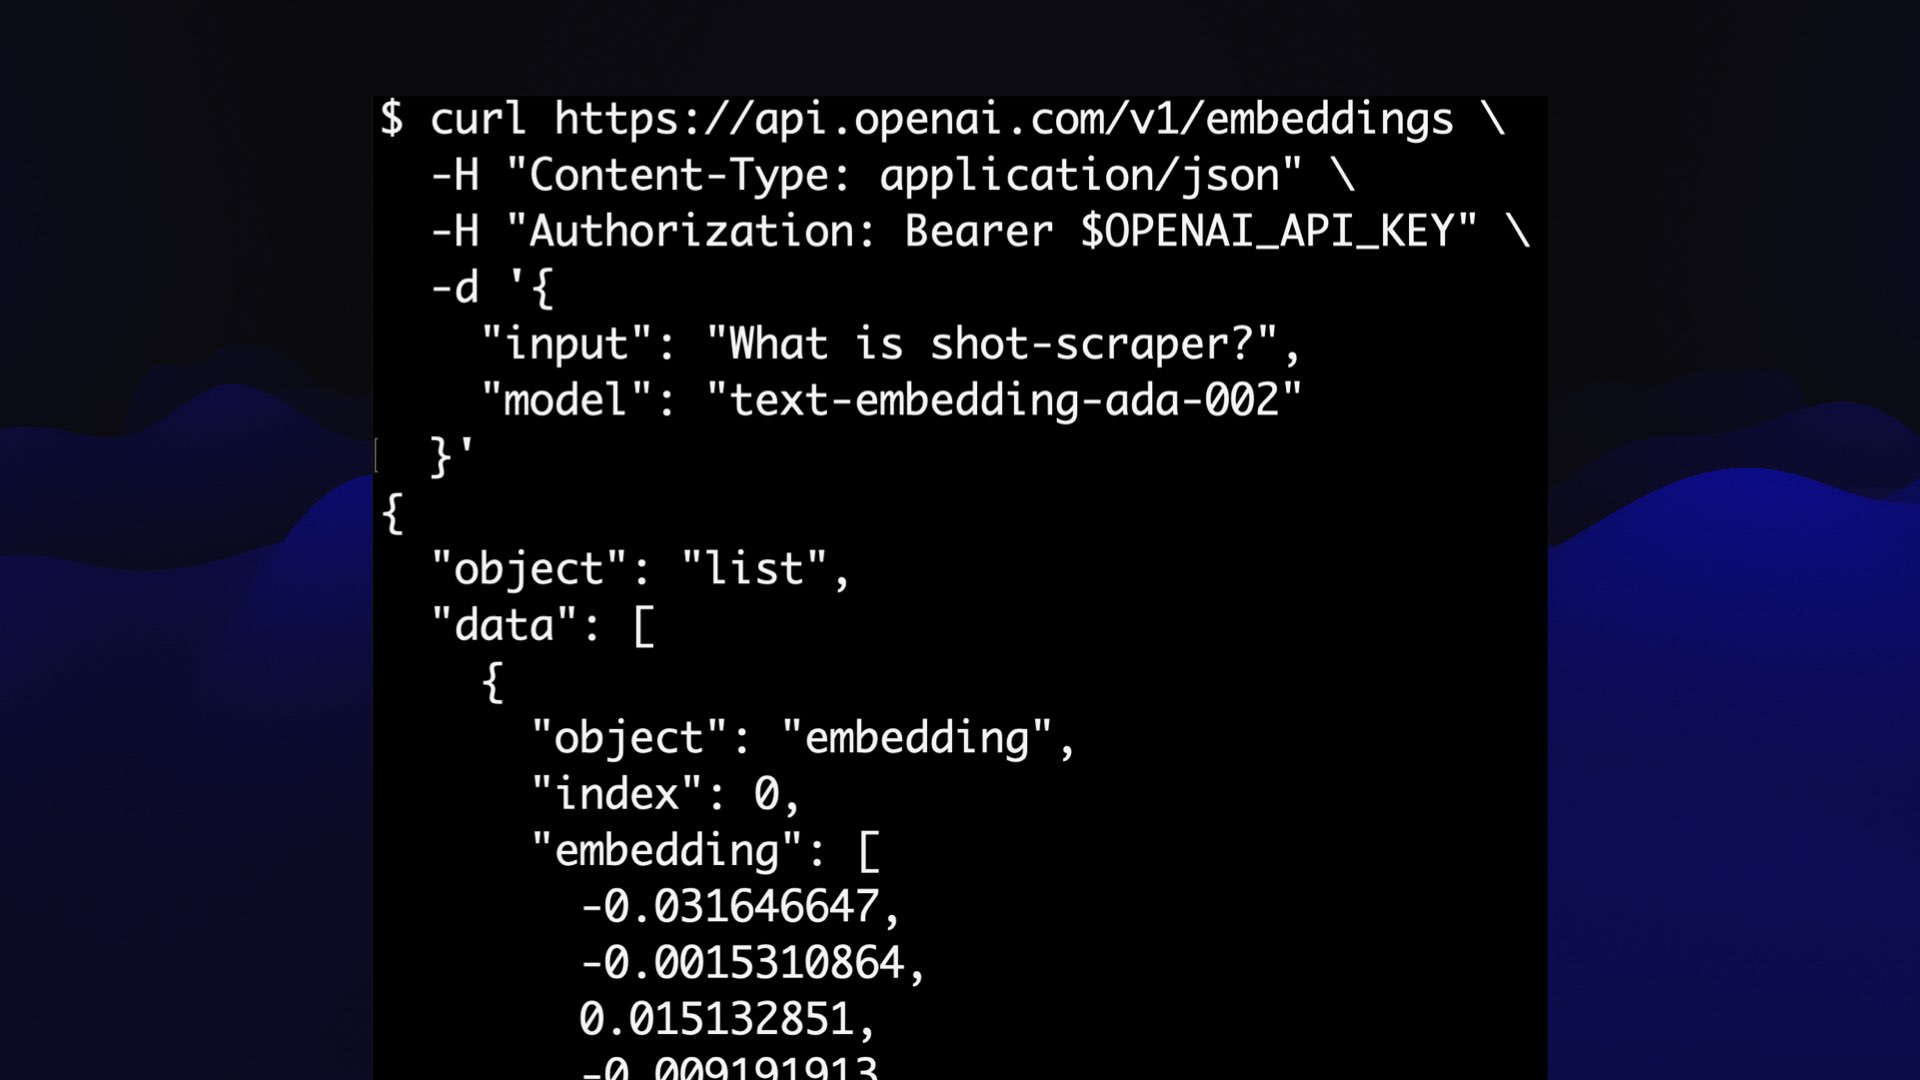 Screenshot of curl against api.openai.com/v1/embeddings sending a Bearer token header and a JSON body specifying input text and the text-embedding-ada-002 model. The API responds with a JSON list of numbers.